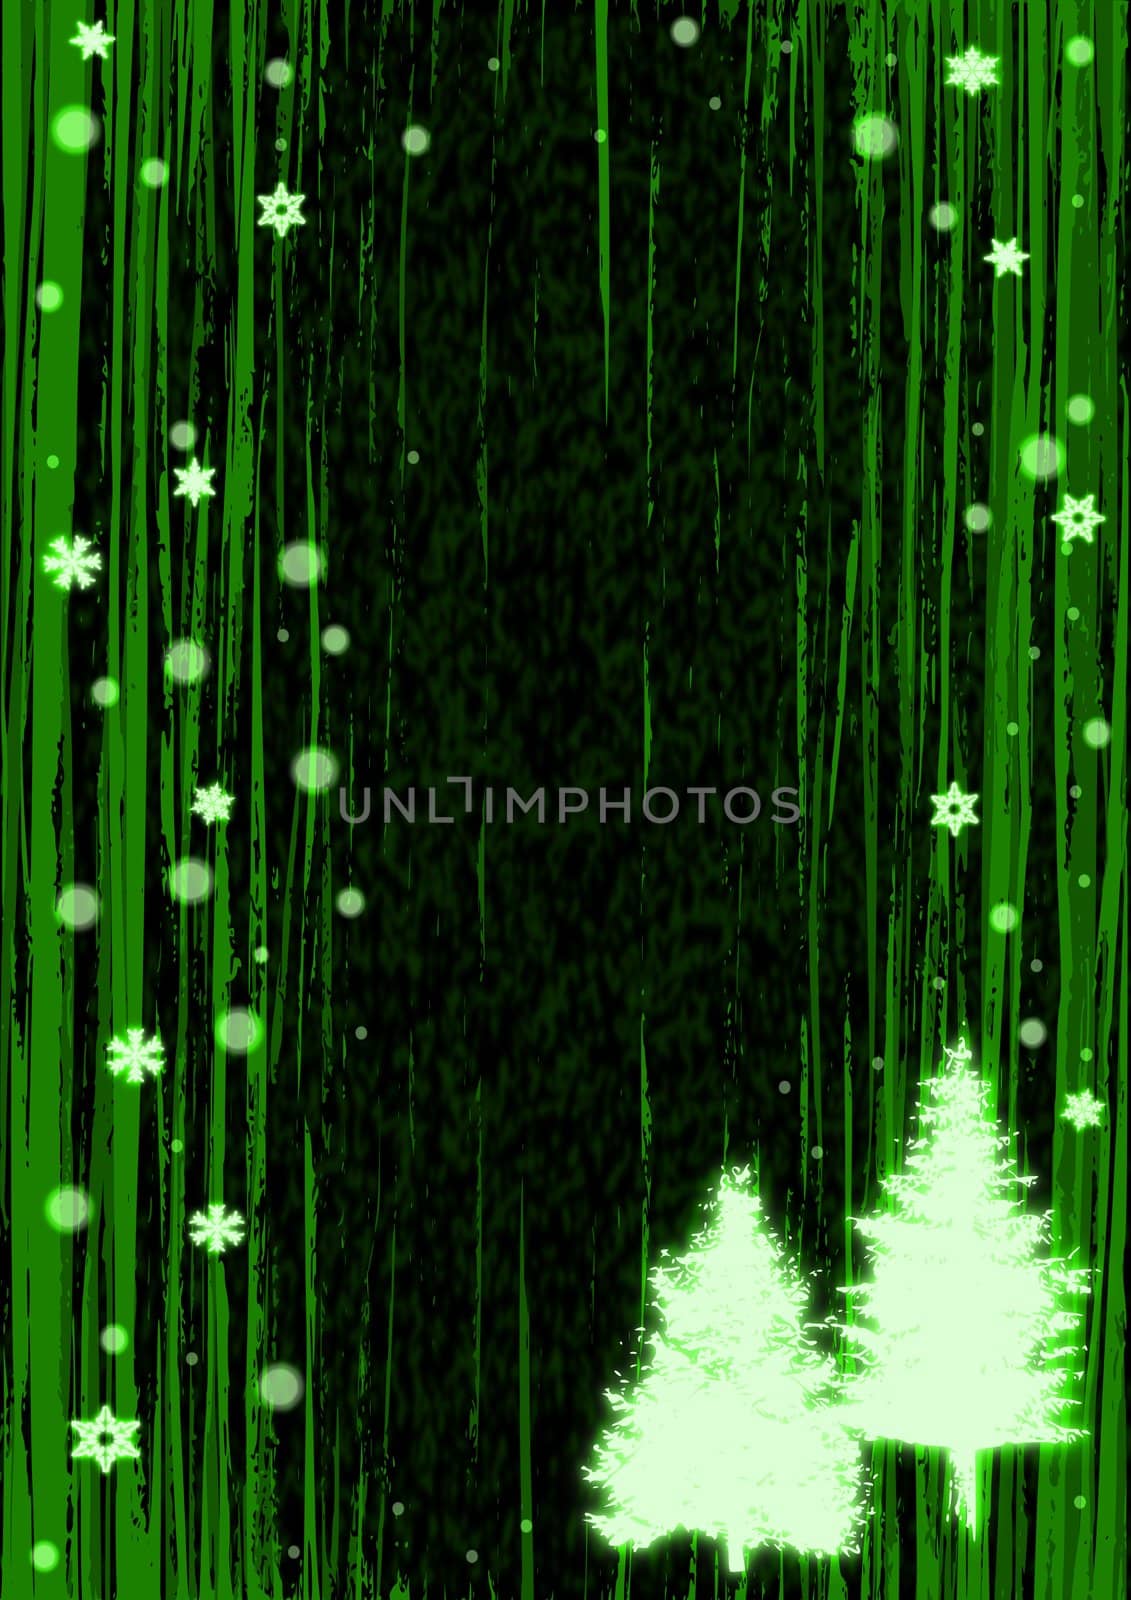 Abstract Christmas tree illustration on an green background.